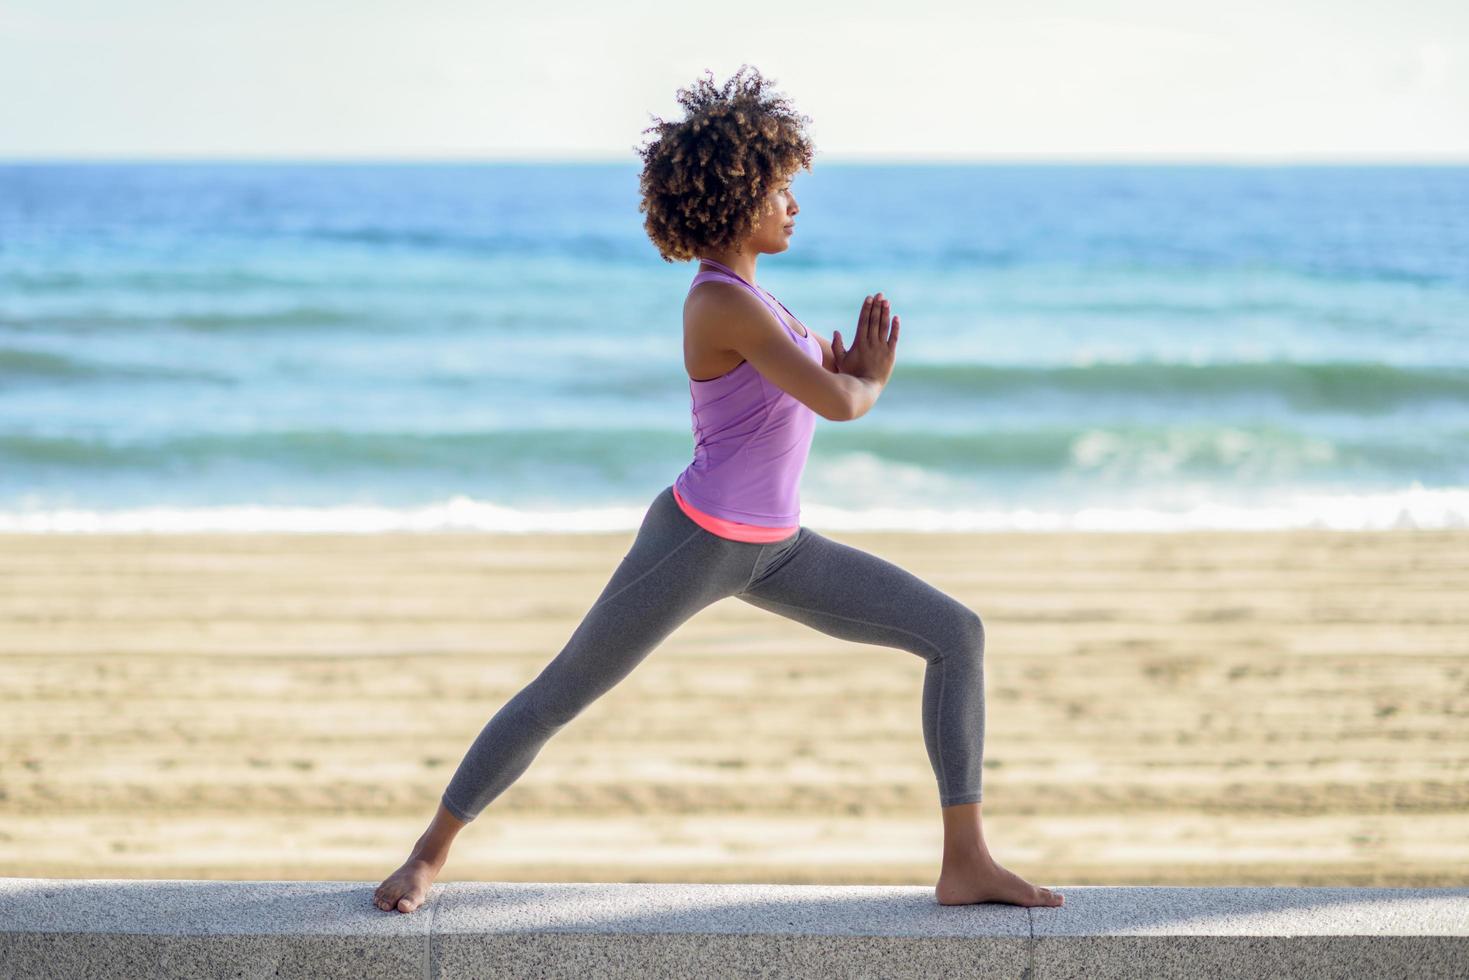 Black woman, afro hairstyle, doing yoga in warrior asana in the beach photo